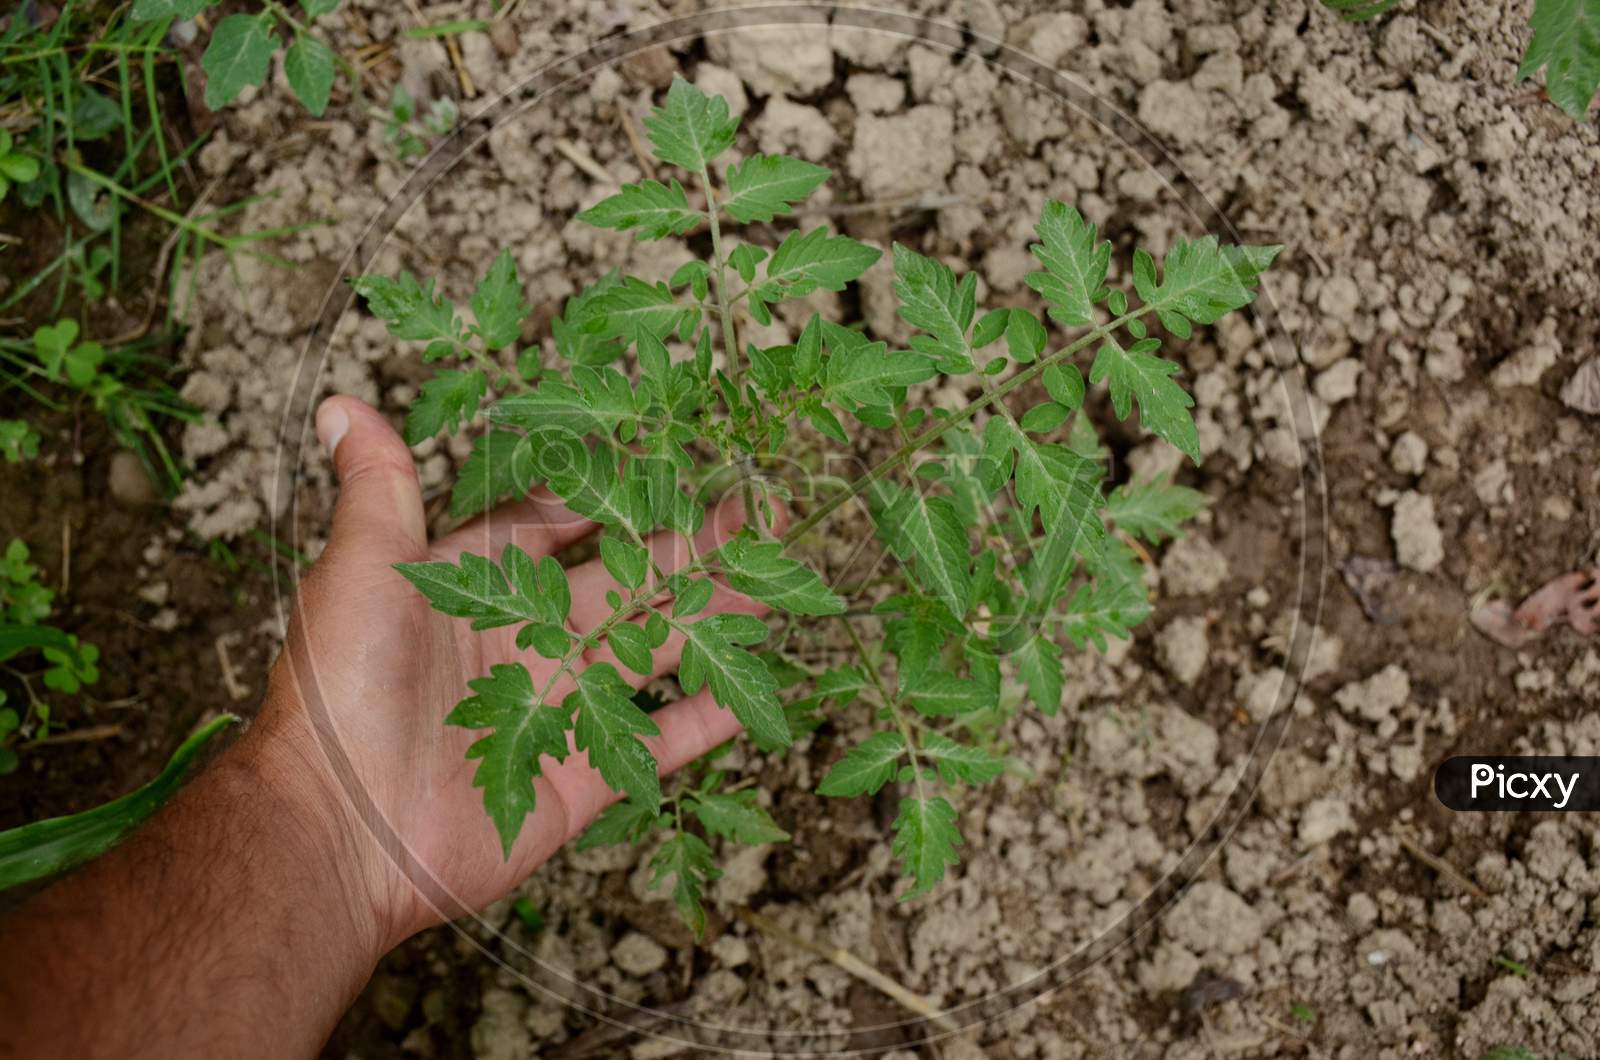 Closeup Ripe Tomato Plant With Hand Seedling Environment Conversation Concept Over Out Of Focus Brown Background.